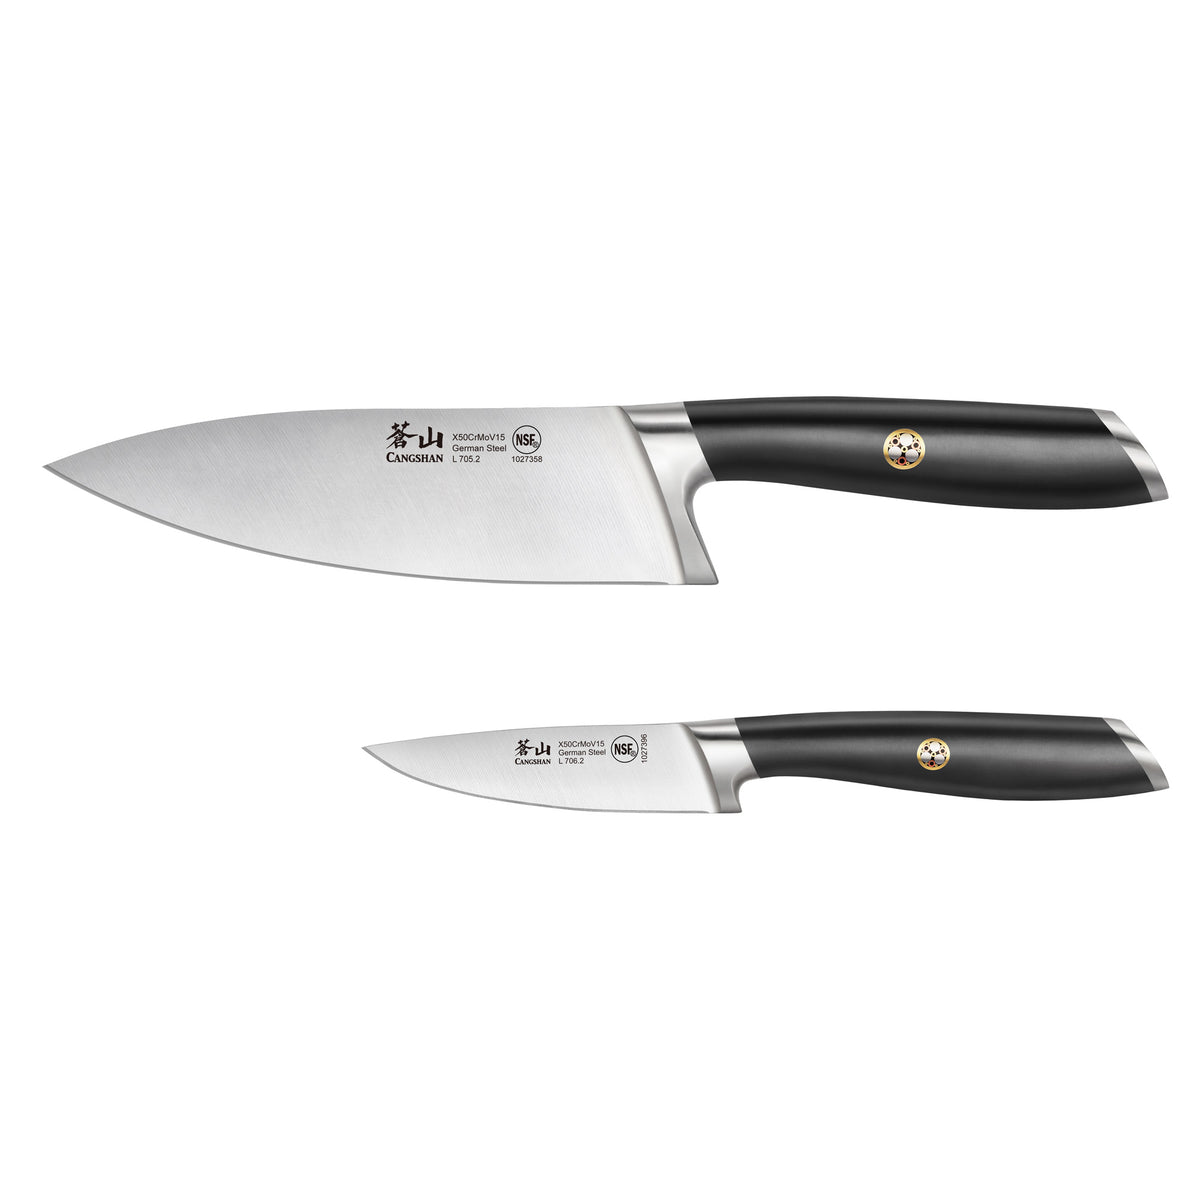 Cangshan L Series 1027358 German Steel Forged 6 Chef's Knife